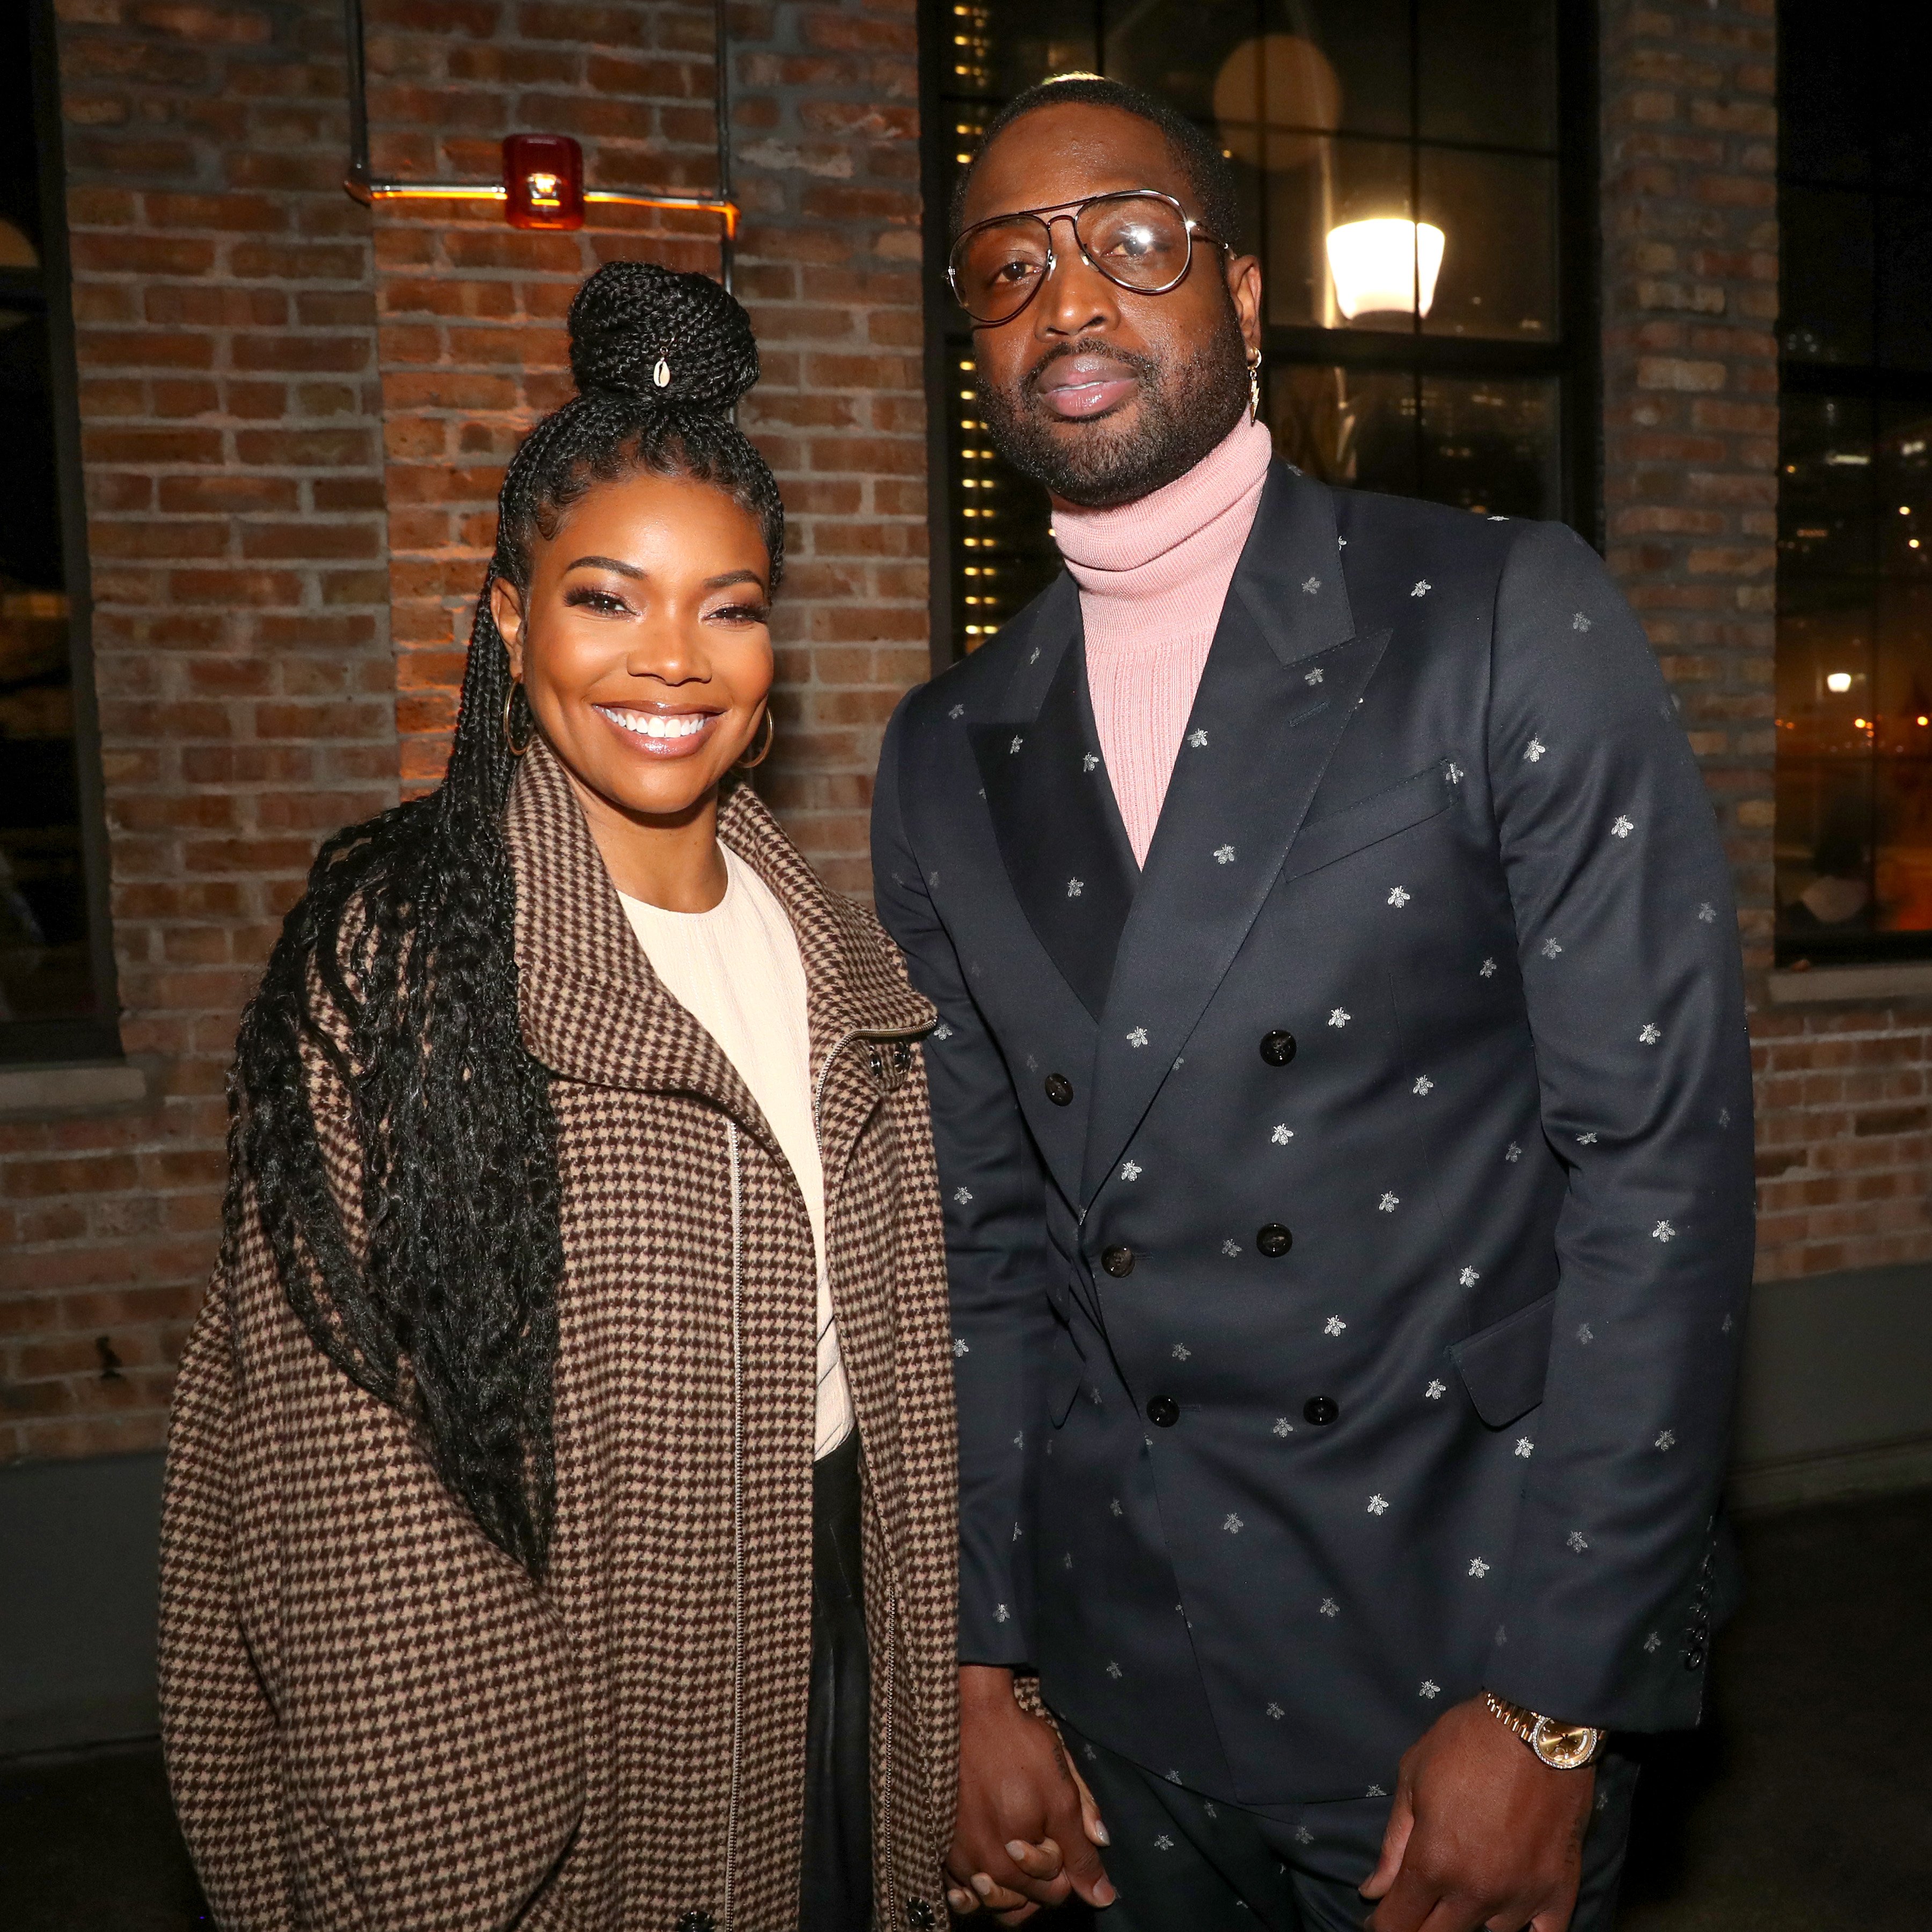 Gabrielle Union and Dwyane Wade attend Stance Spades at NBA All-Star 2020 on February 15, 2020, in Chicago, Illinois. | Source: Getty Images.